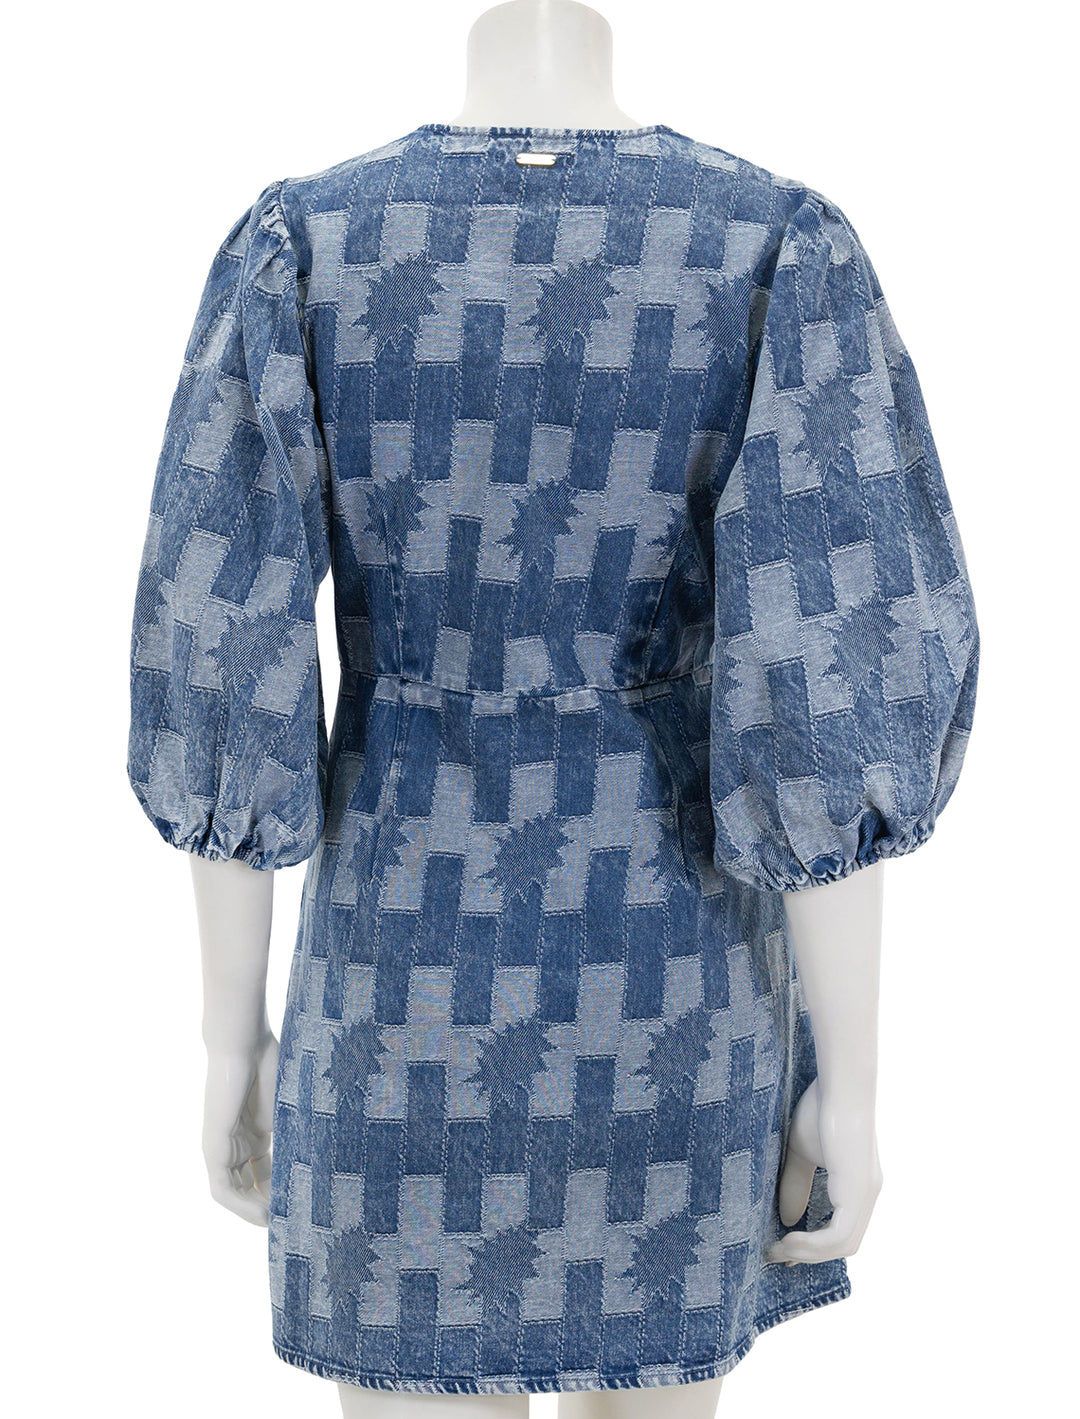 Back view of Barbour's bowhill mini dress in patchwork denim.